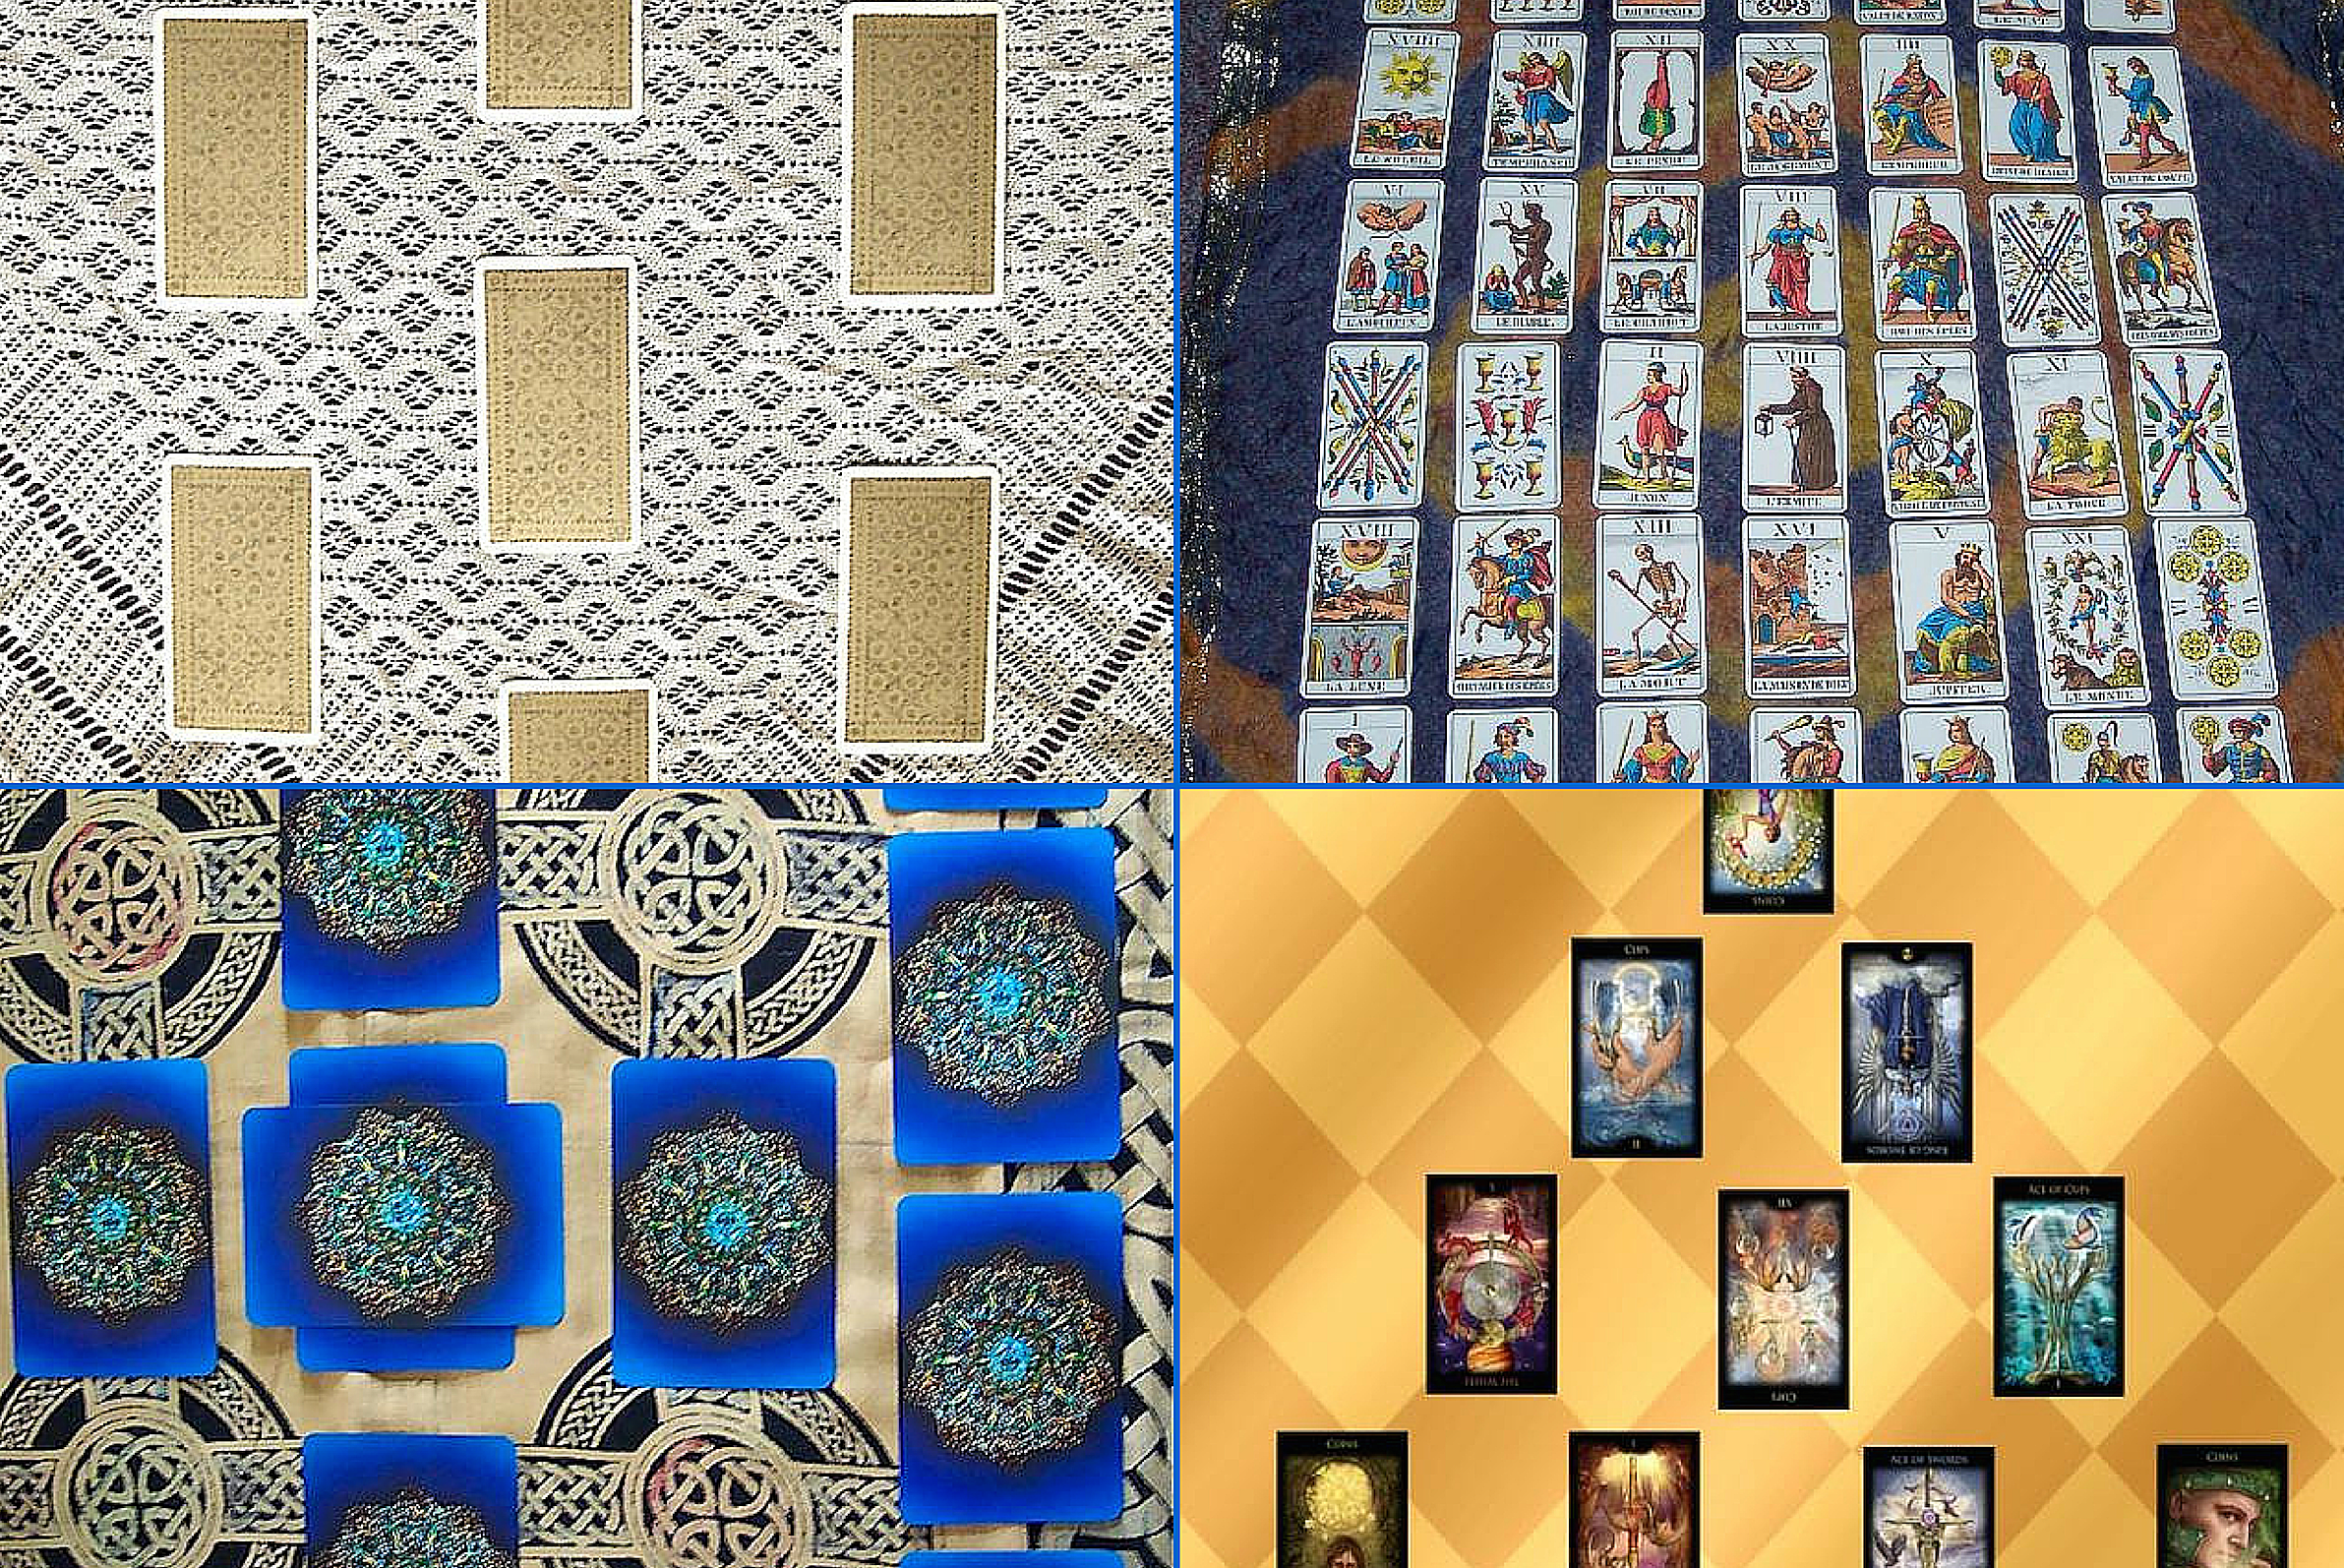 Tarot Spreads - Layouts for your Tarot Card Readings